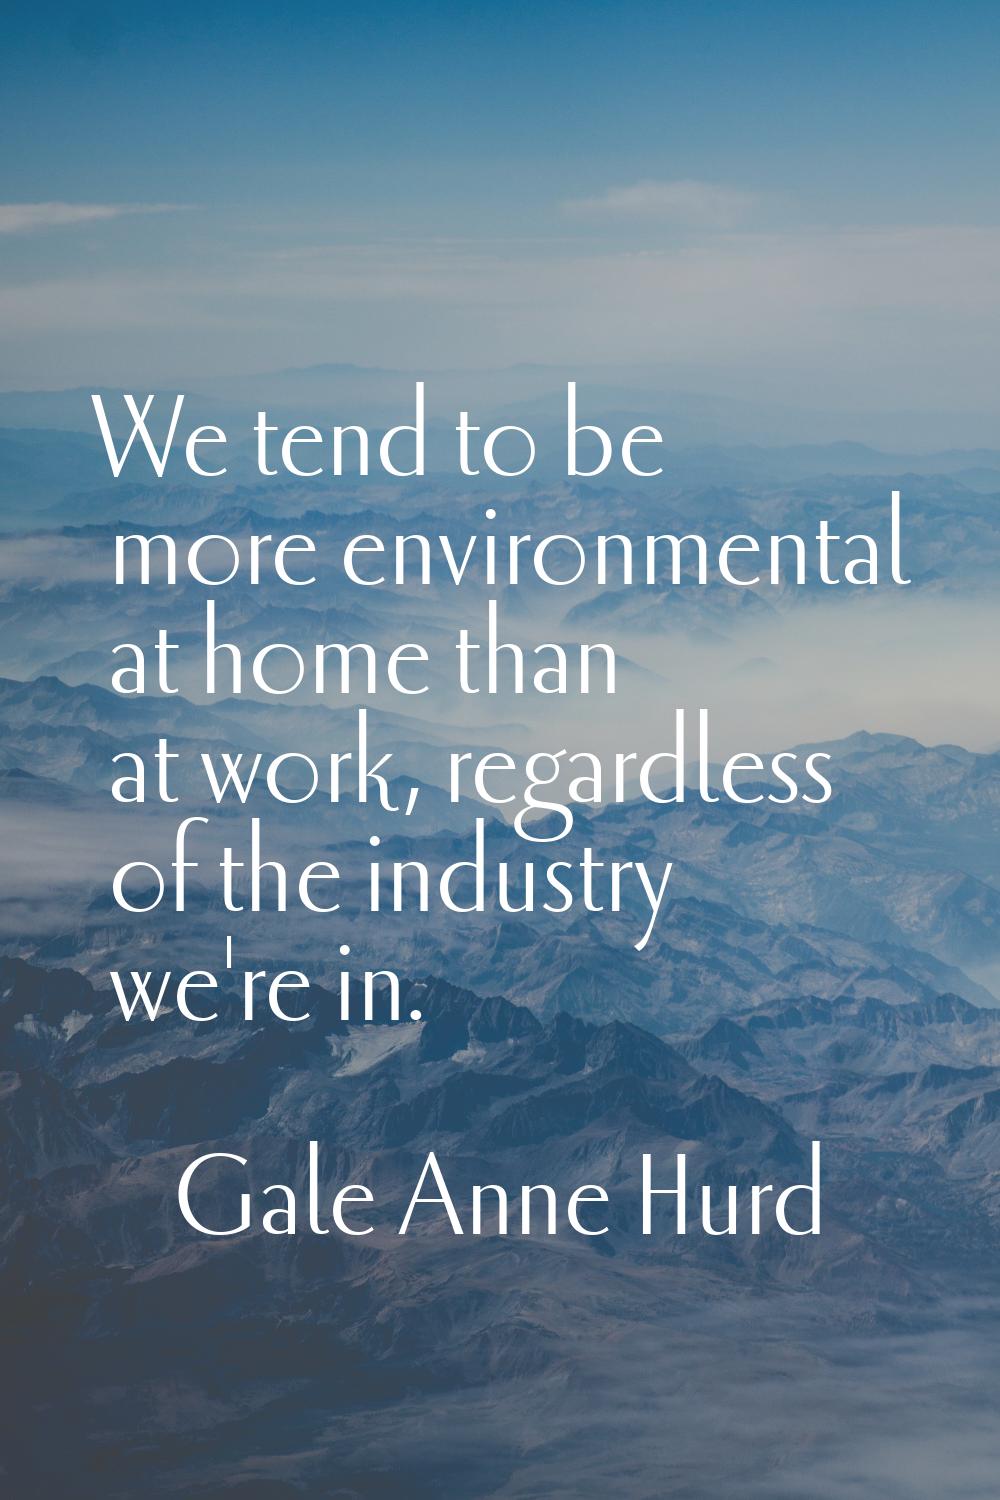 We tend to be more environmental at home than at work, regardless of the industry we're in.